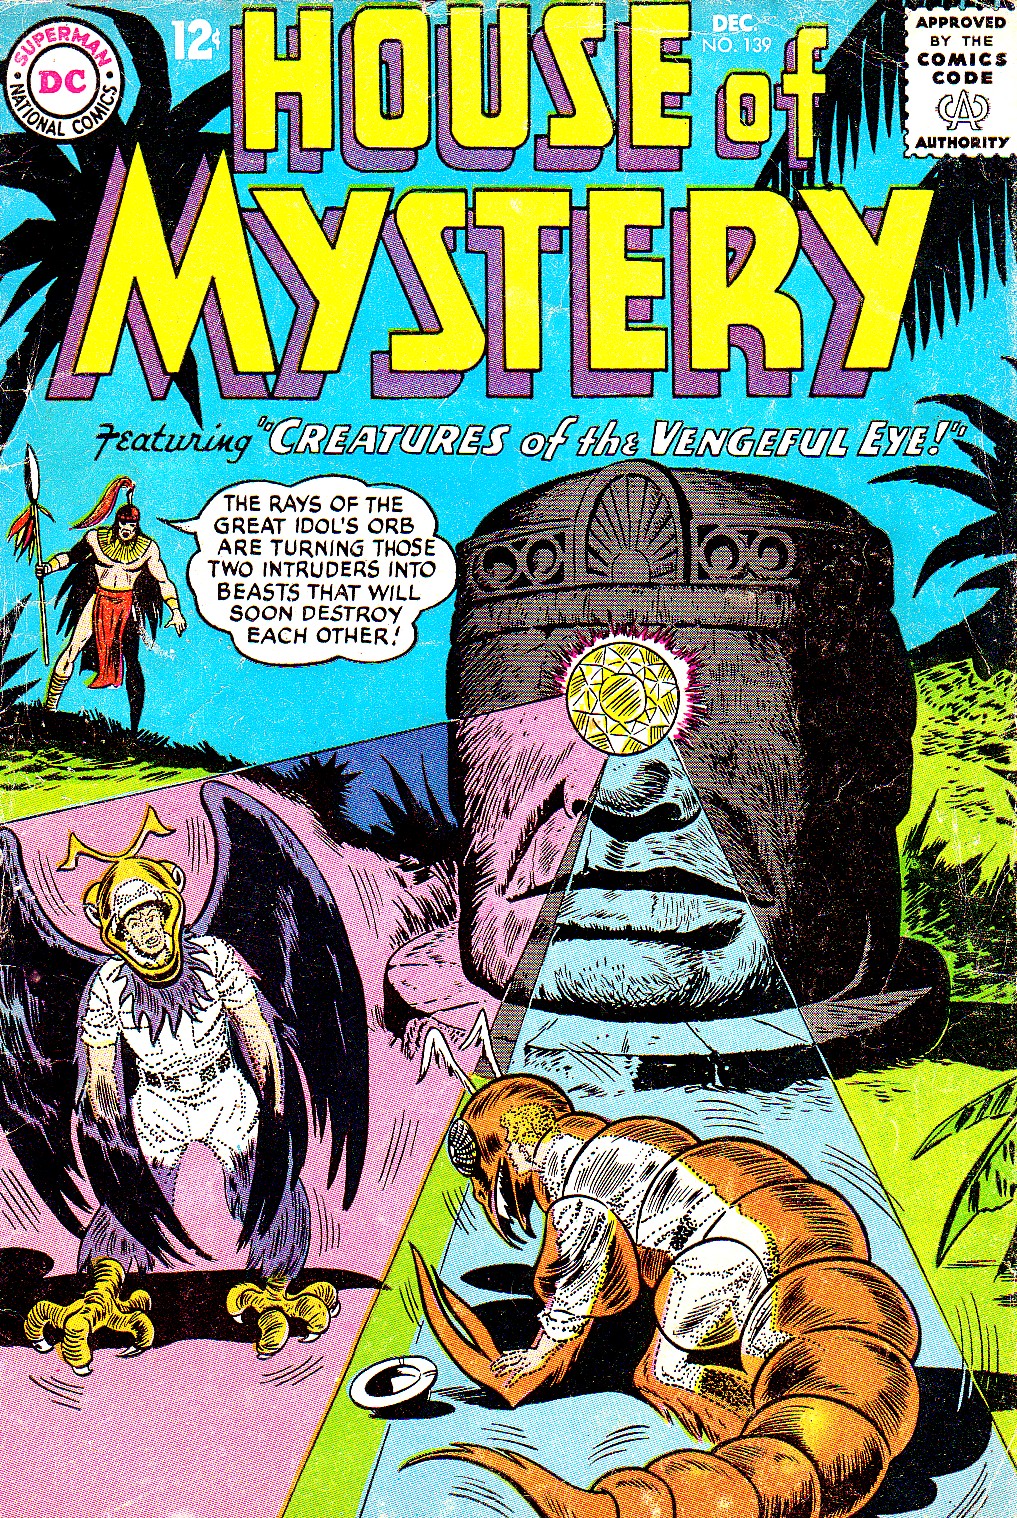 Read online House of Mystery (1951) comic -  Issue #139 - 1